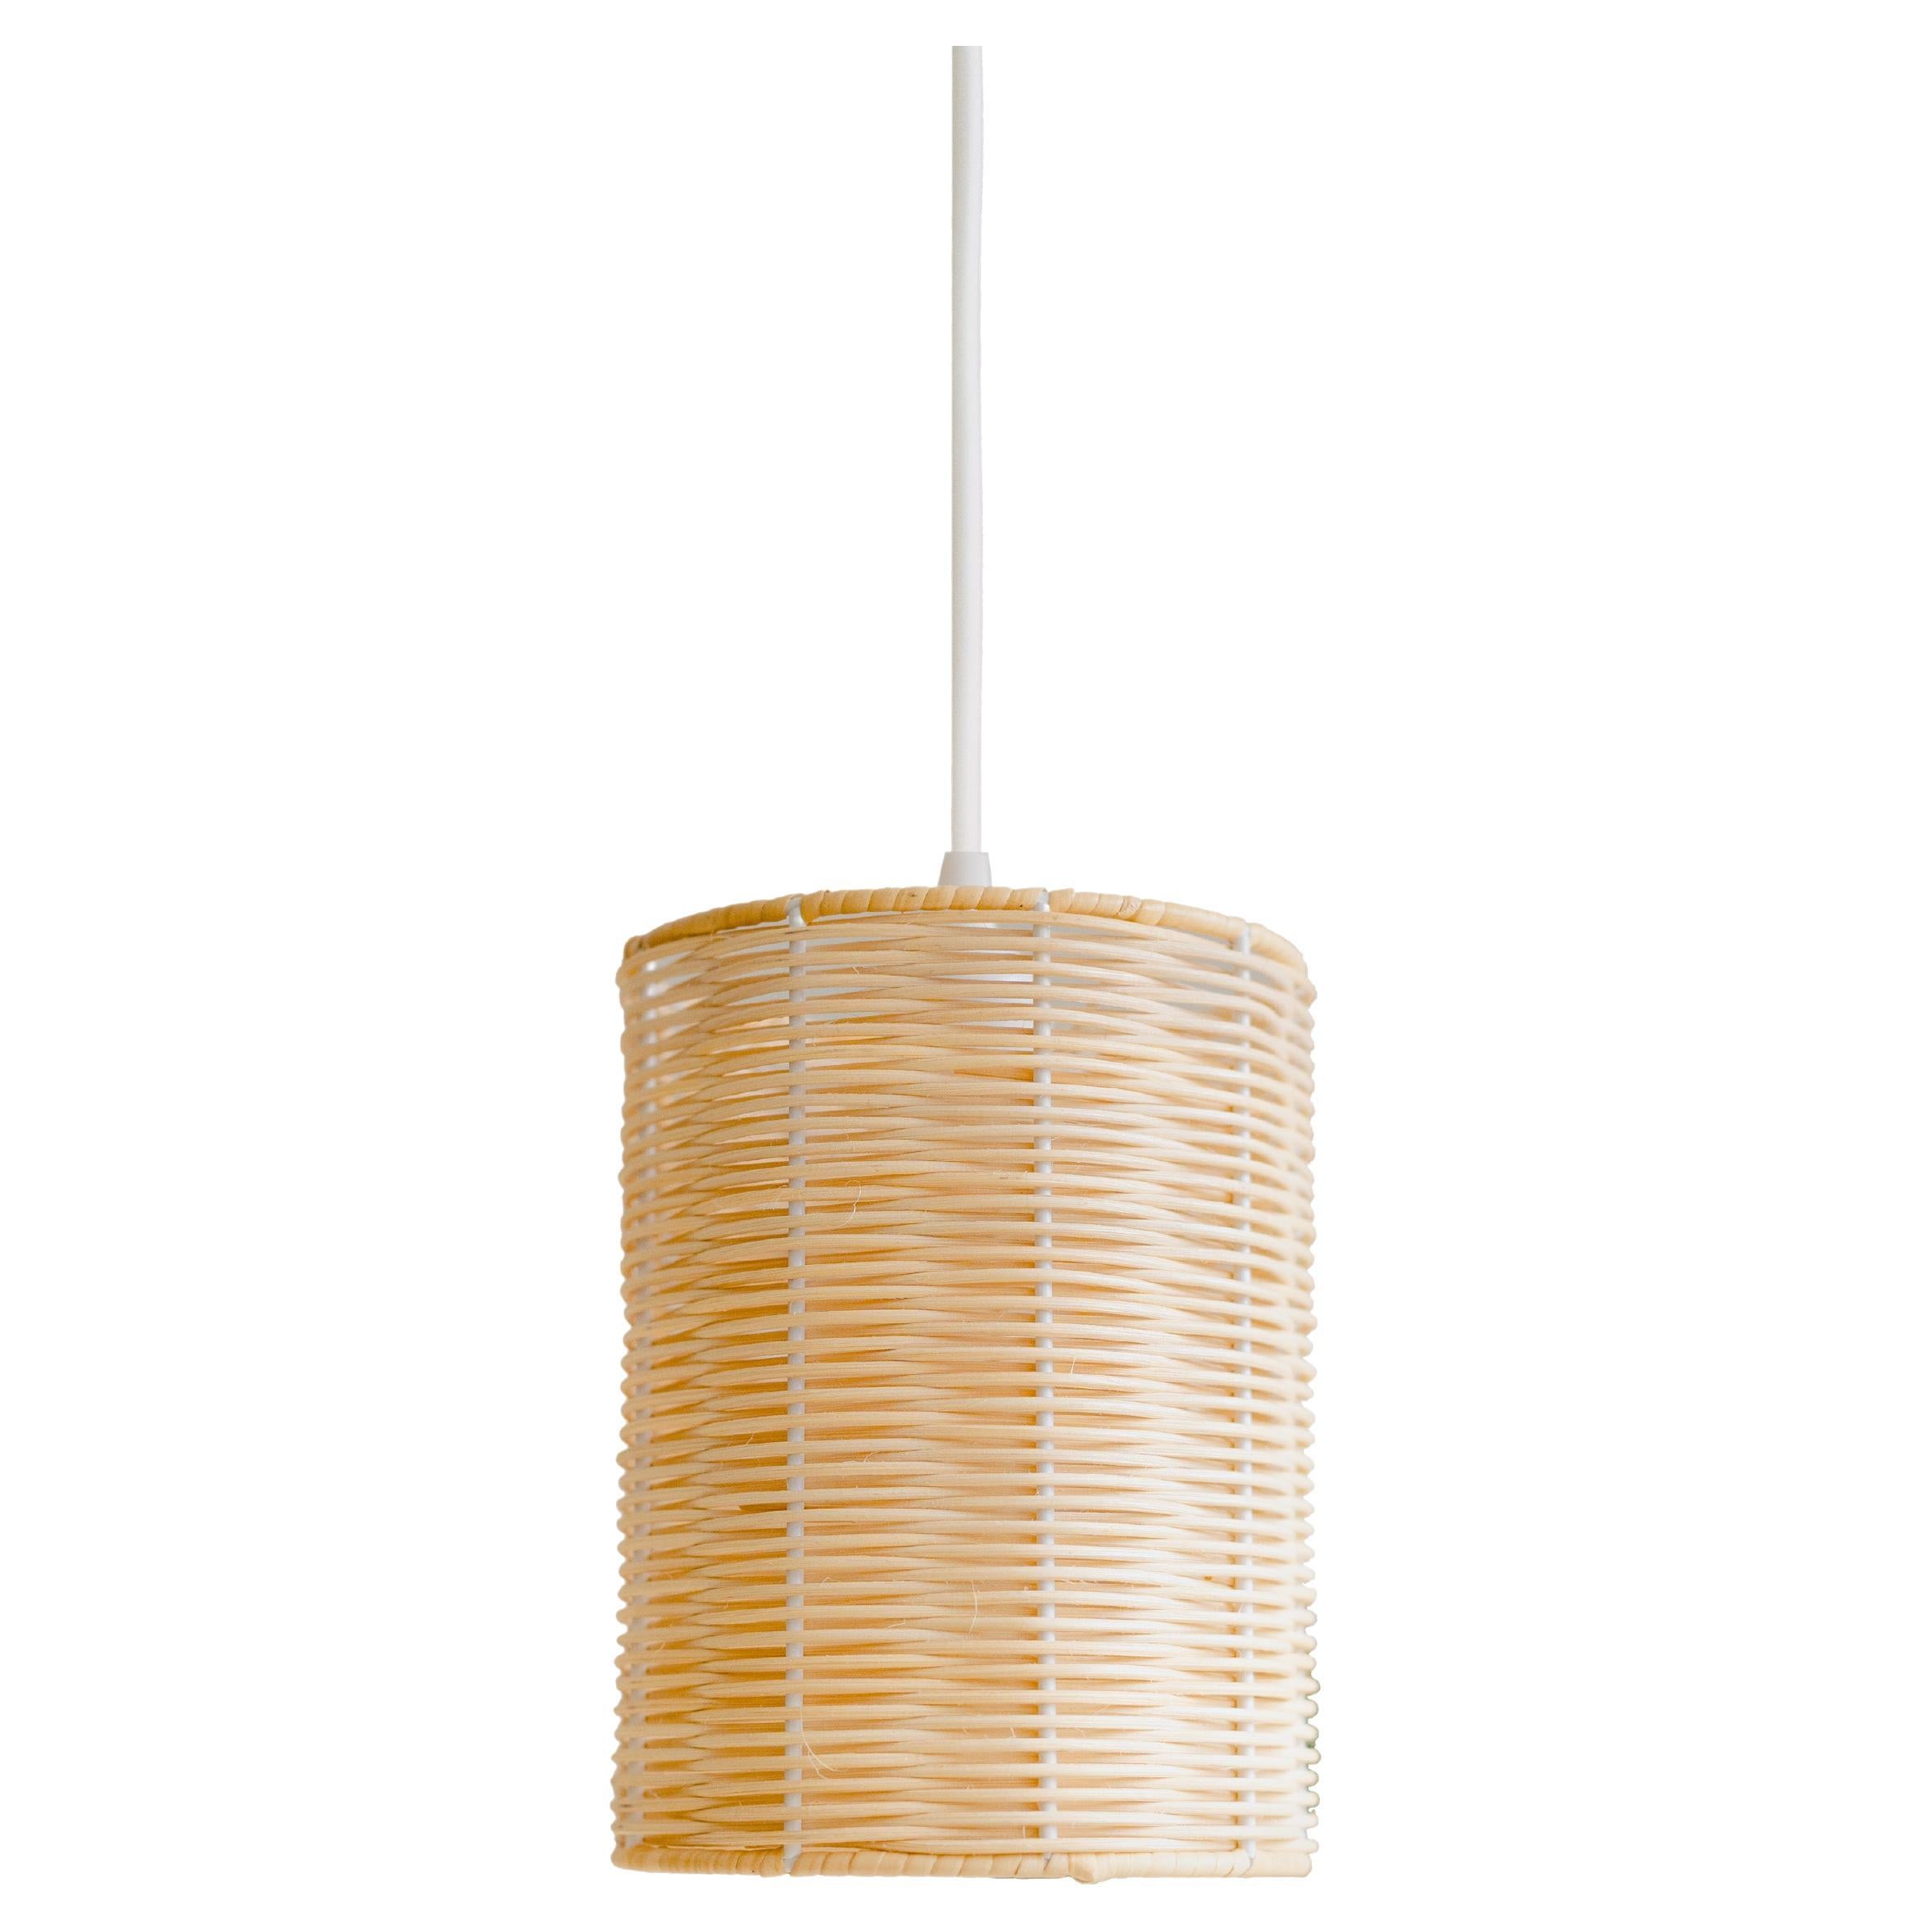 Contemporary, Handmade, Pendant Lamp, Rattan Cylinder, by Mediterranean Objects